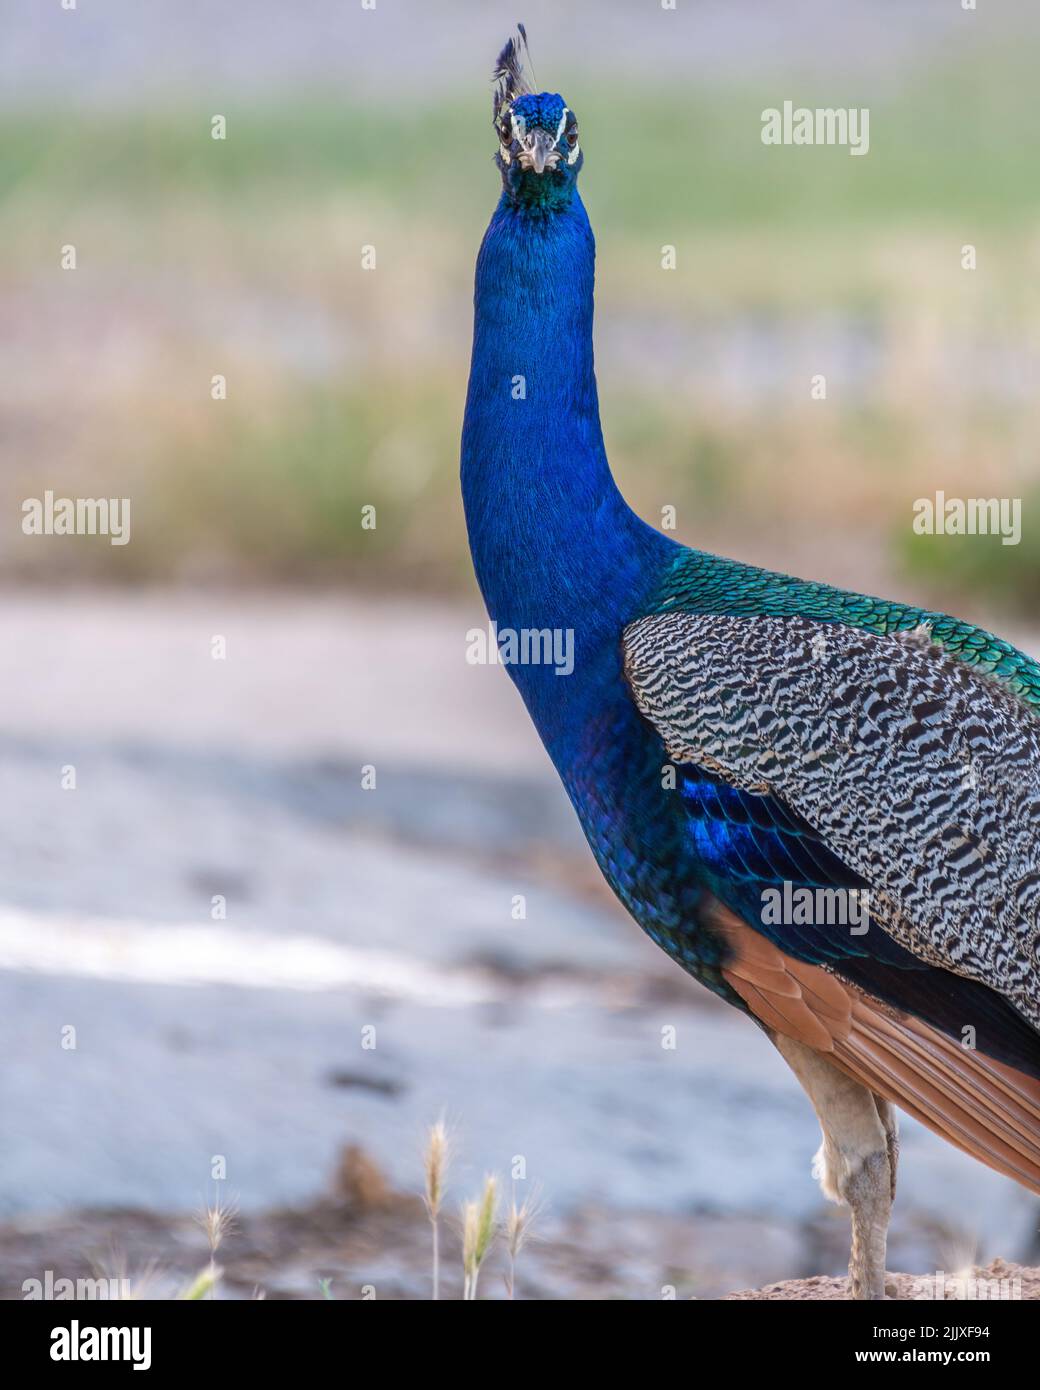 peacock with colorful blue plumage Stock Photo